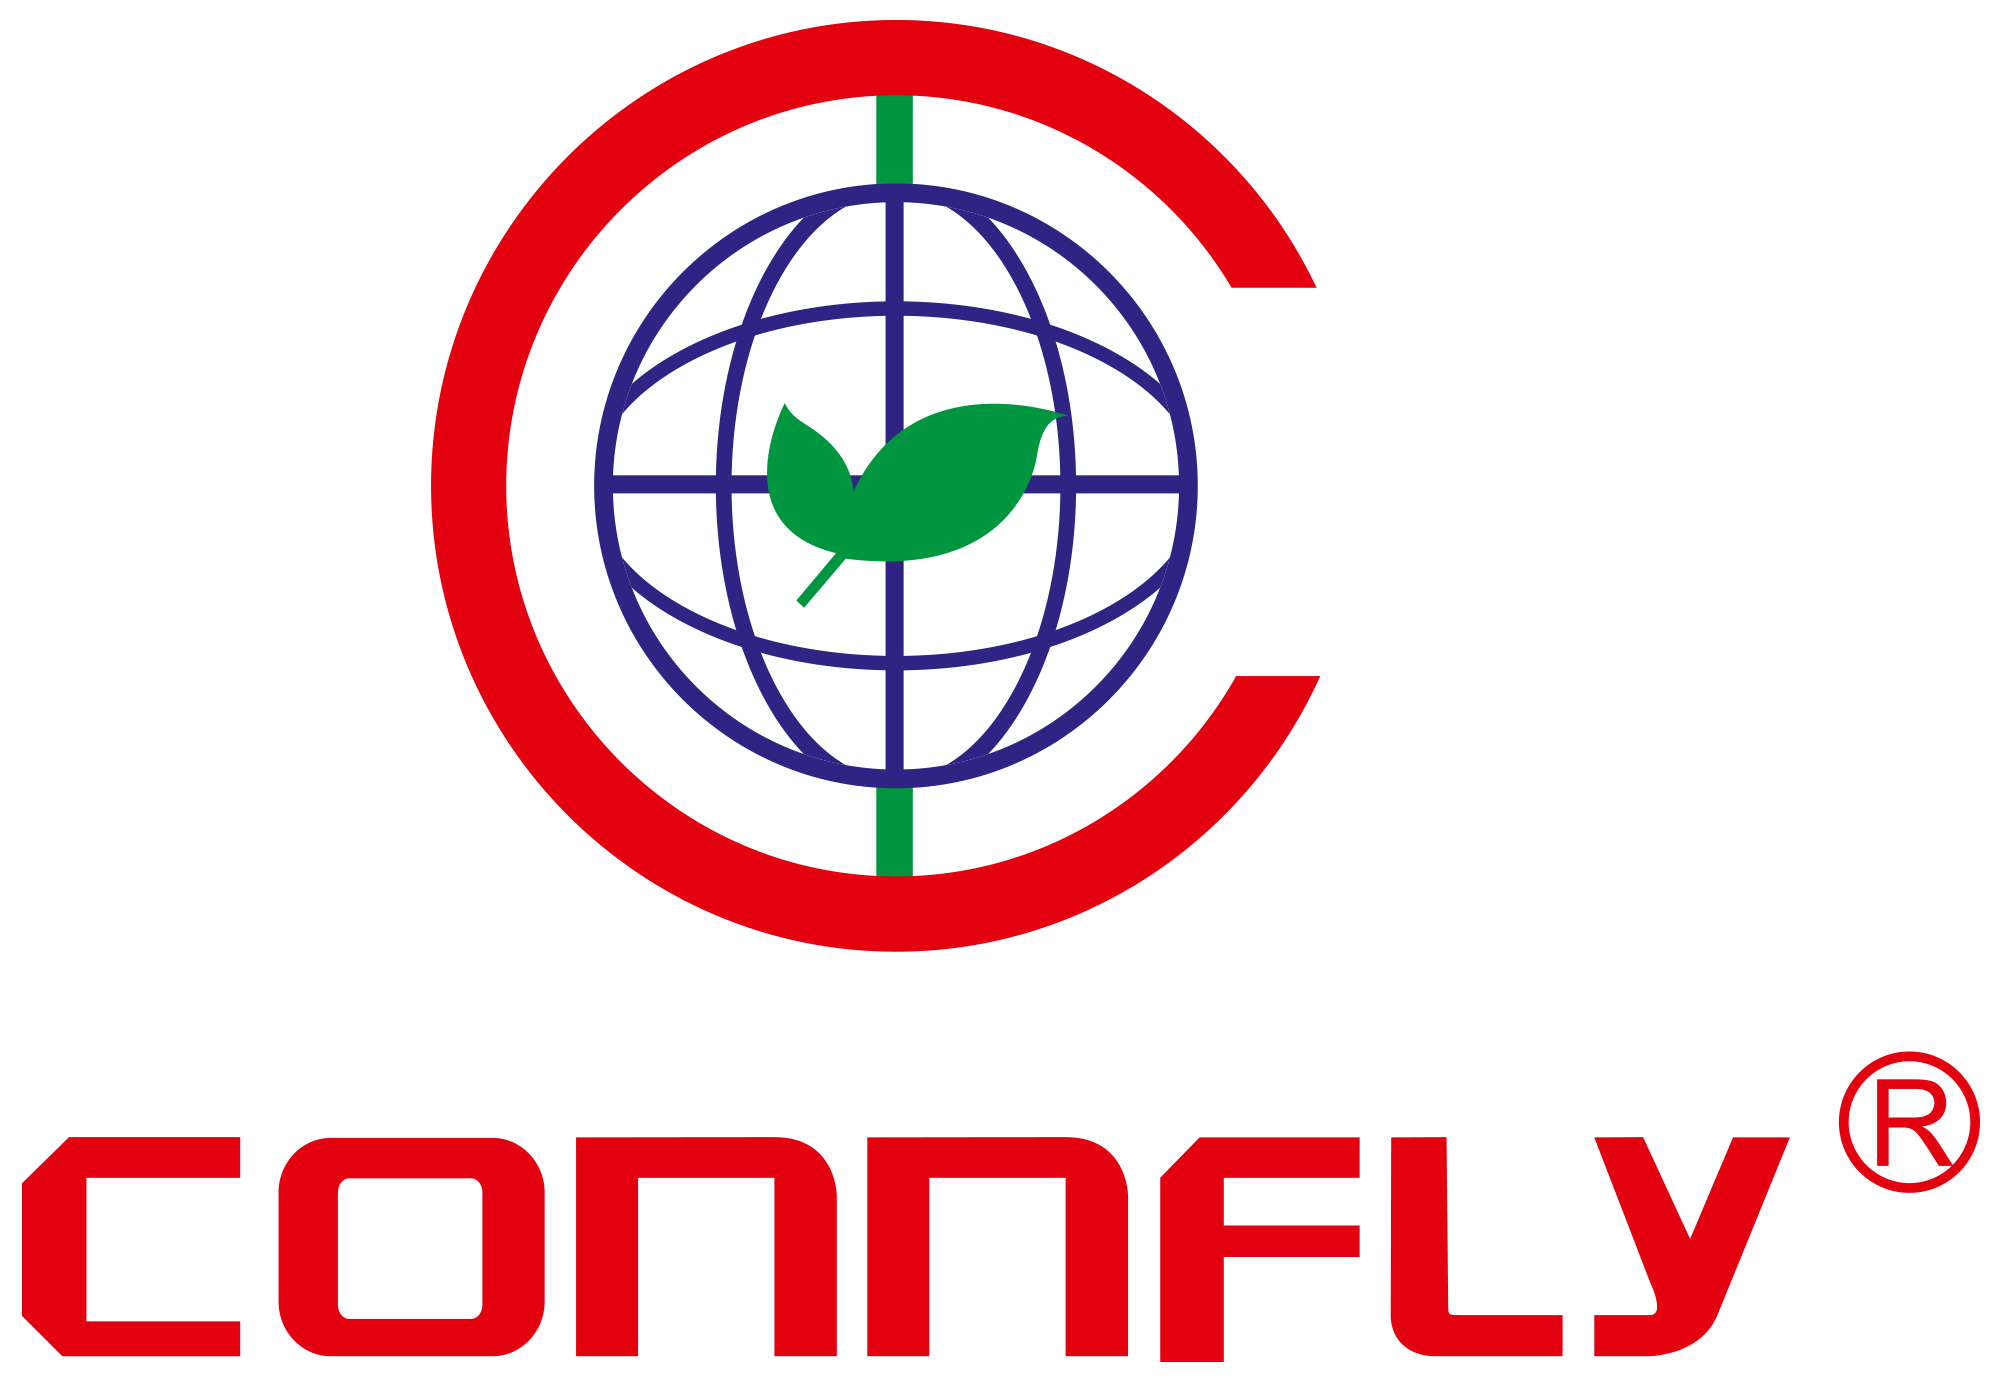 CONNFLY